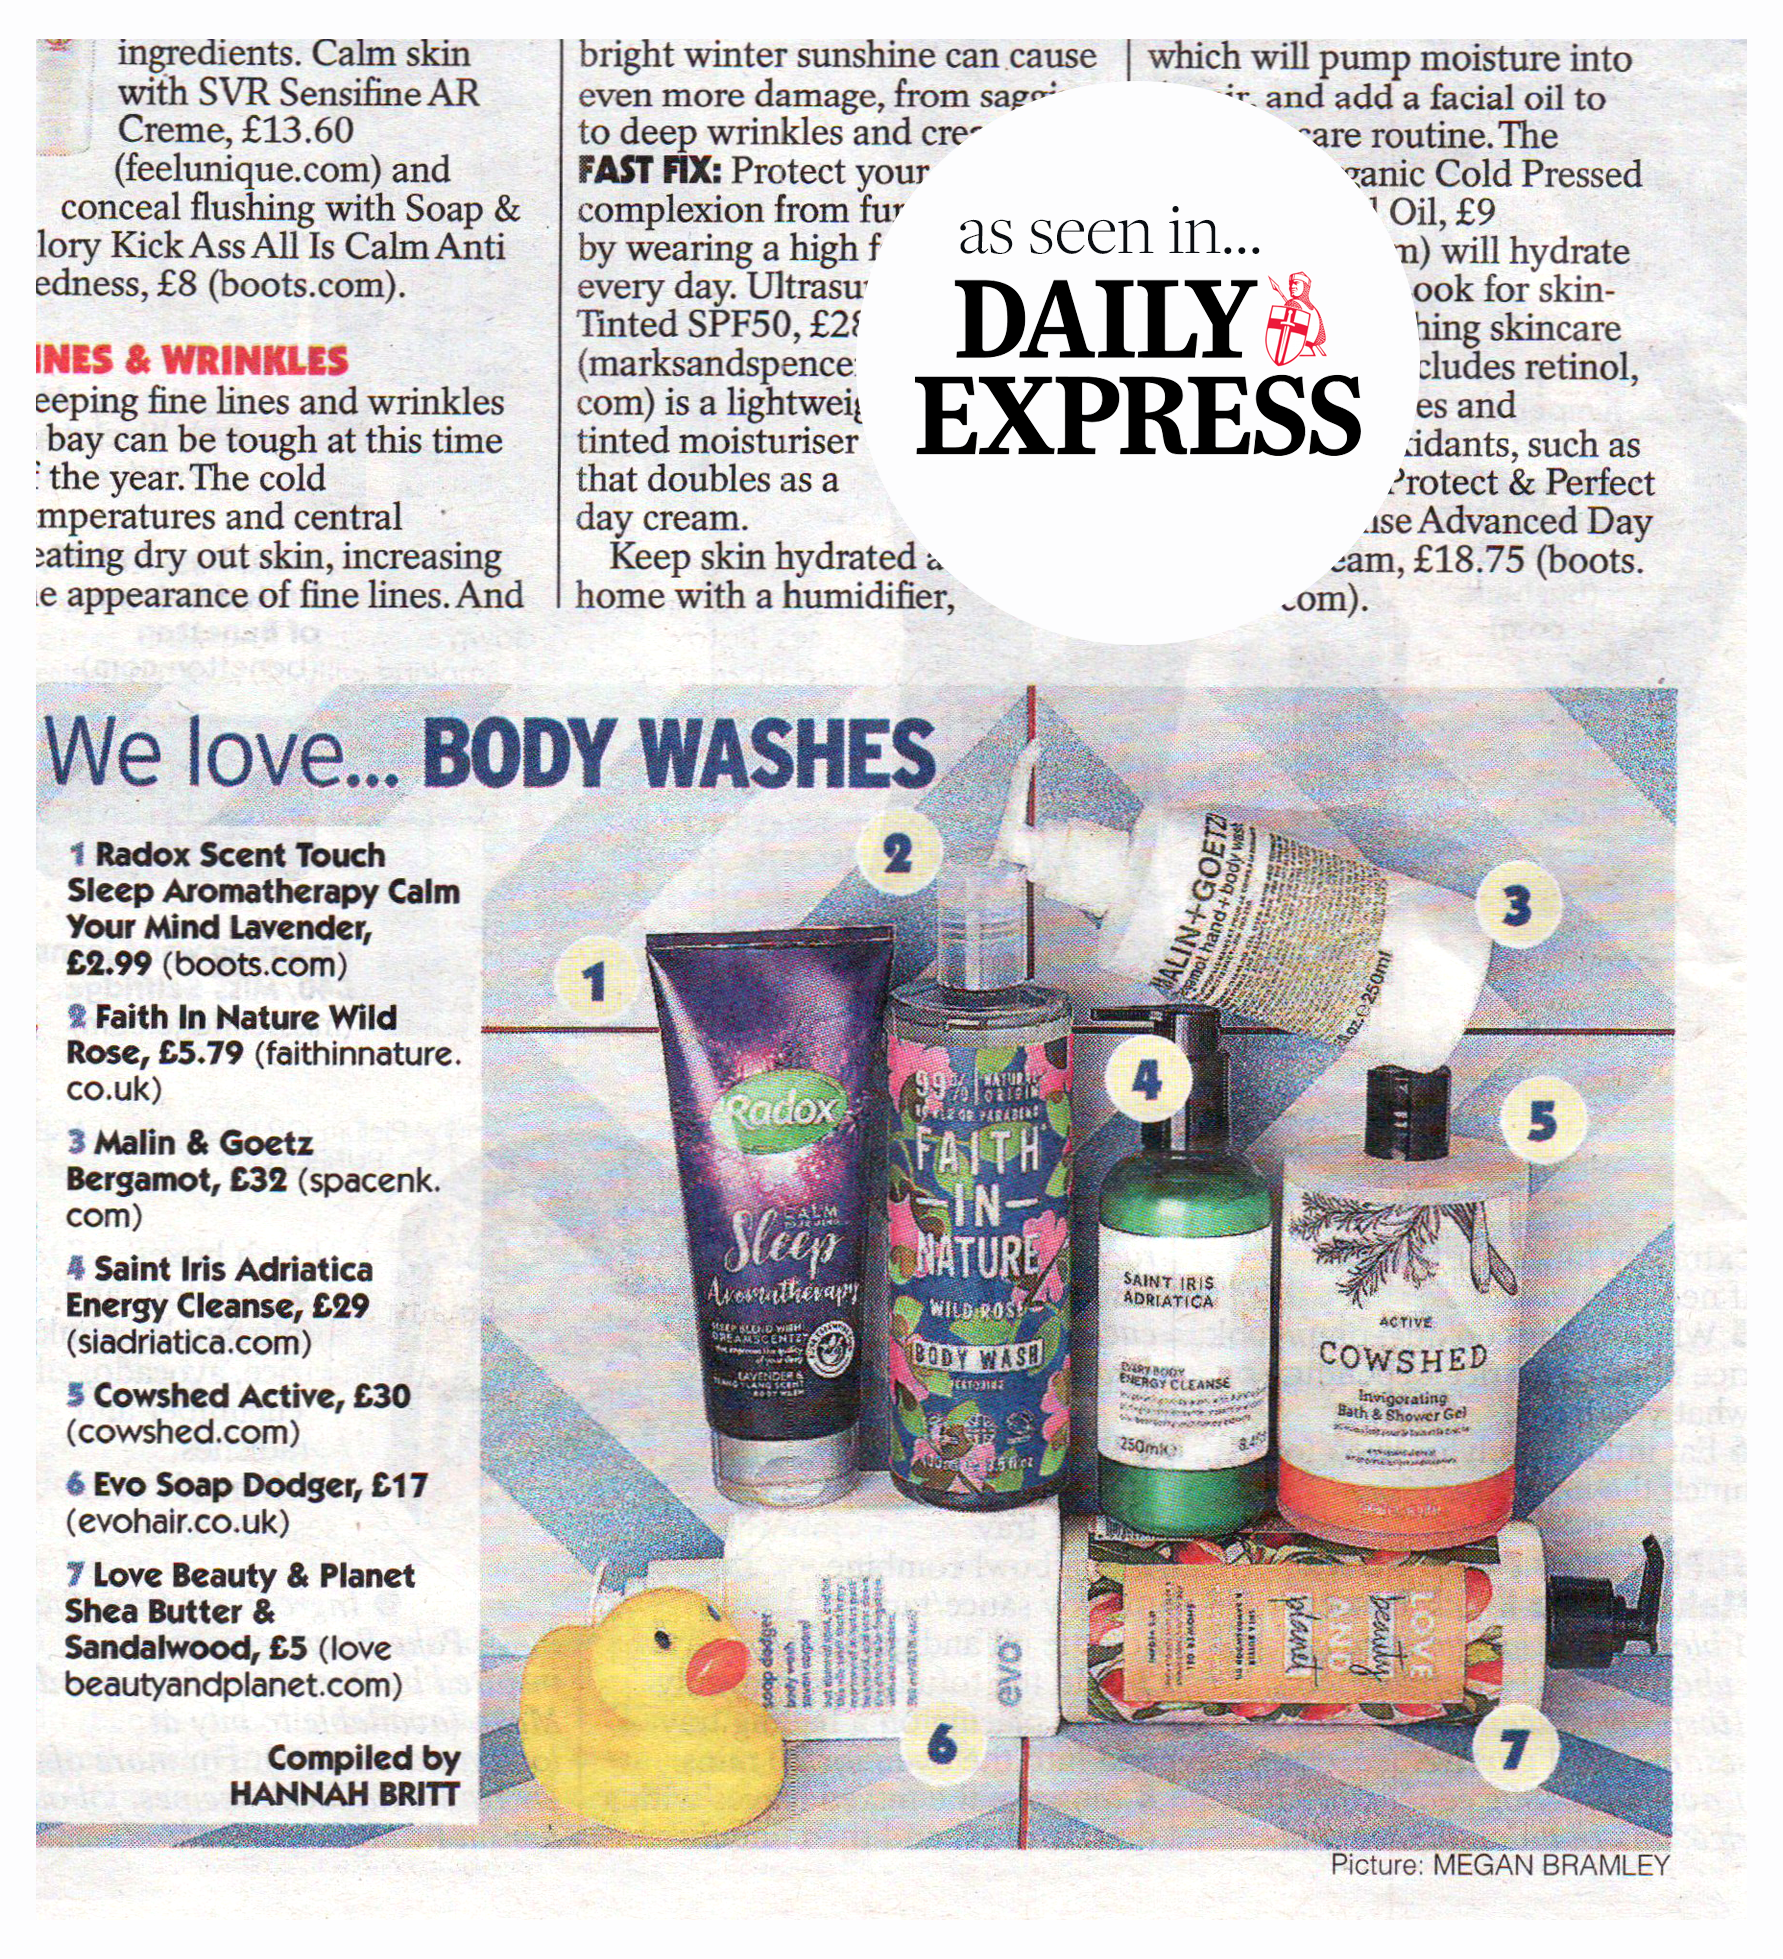 Energy Cleanse features in the daily express